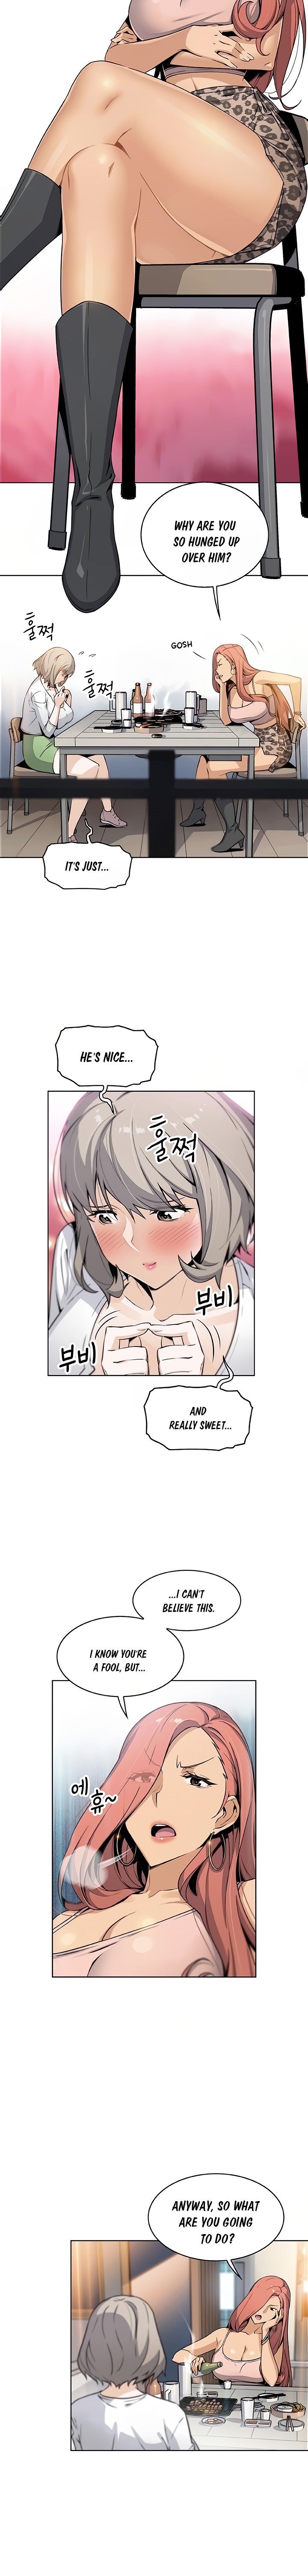 Housekeeper Manhwa - Chapter 34 Page 2